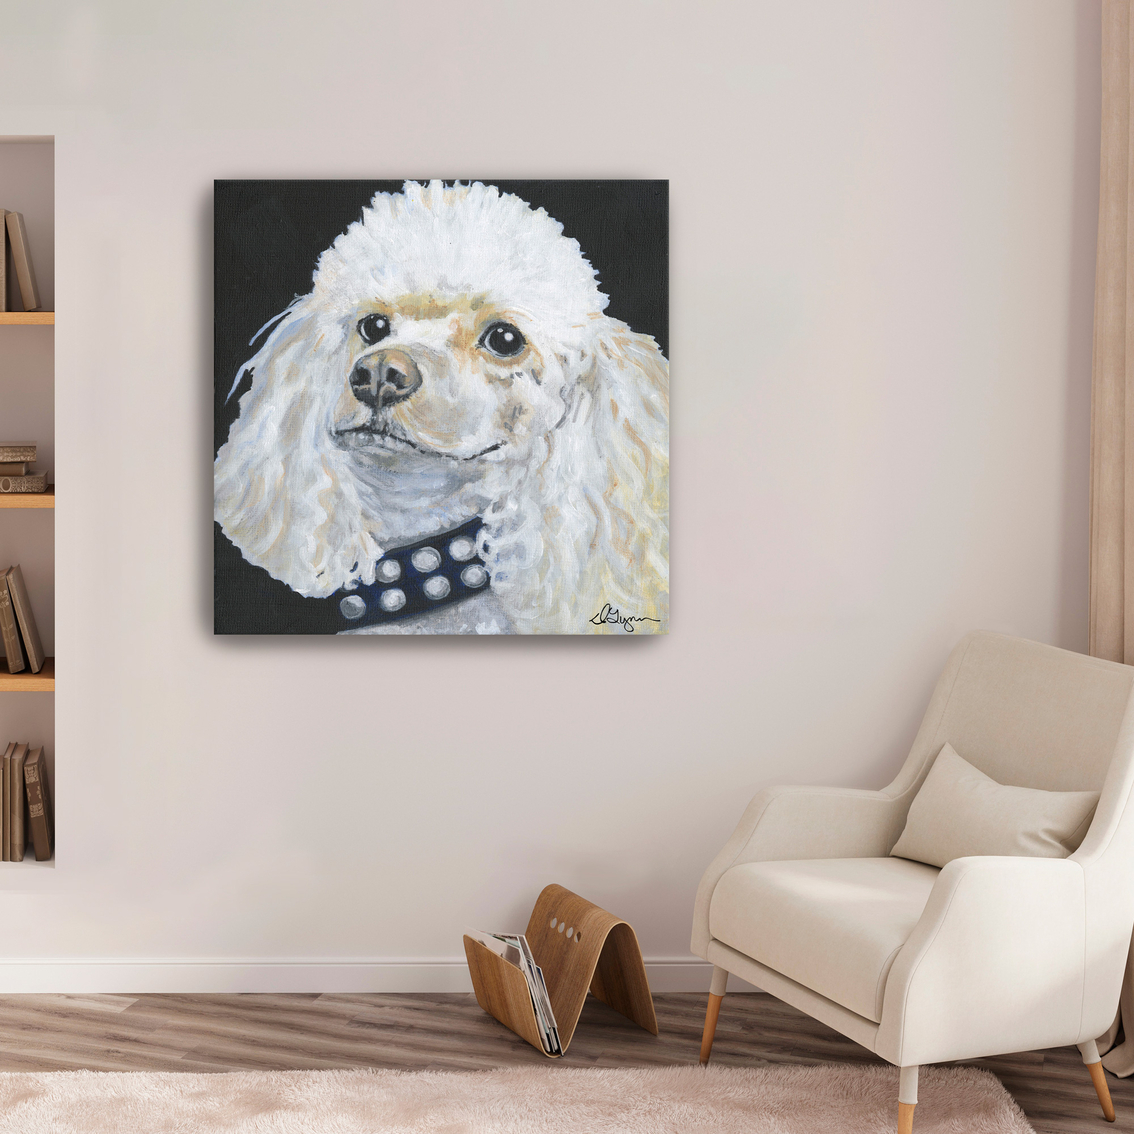 Inkstry Dlynns Dogs Harley 20 x 20 Canvas Giclee Gallery Wrap Canvas Print - Image 3 of 3